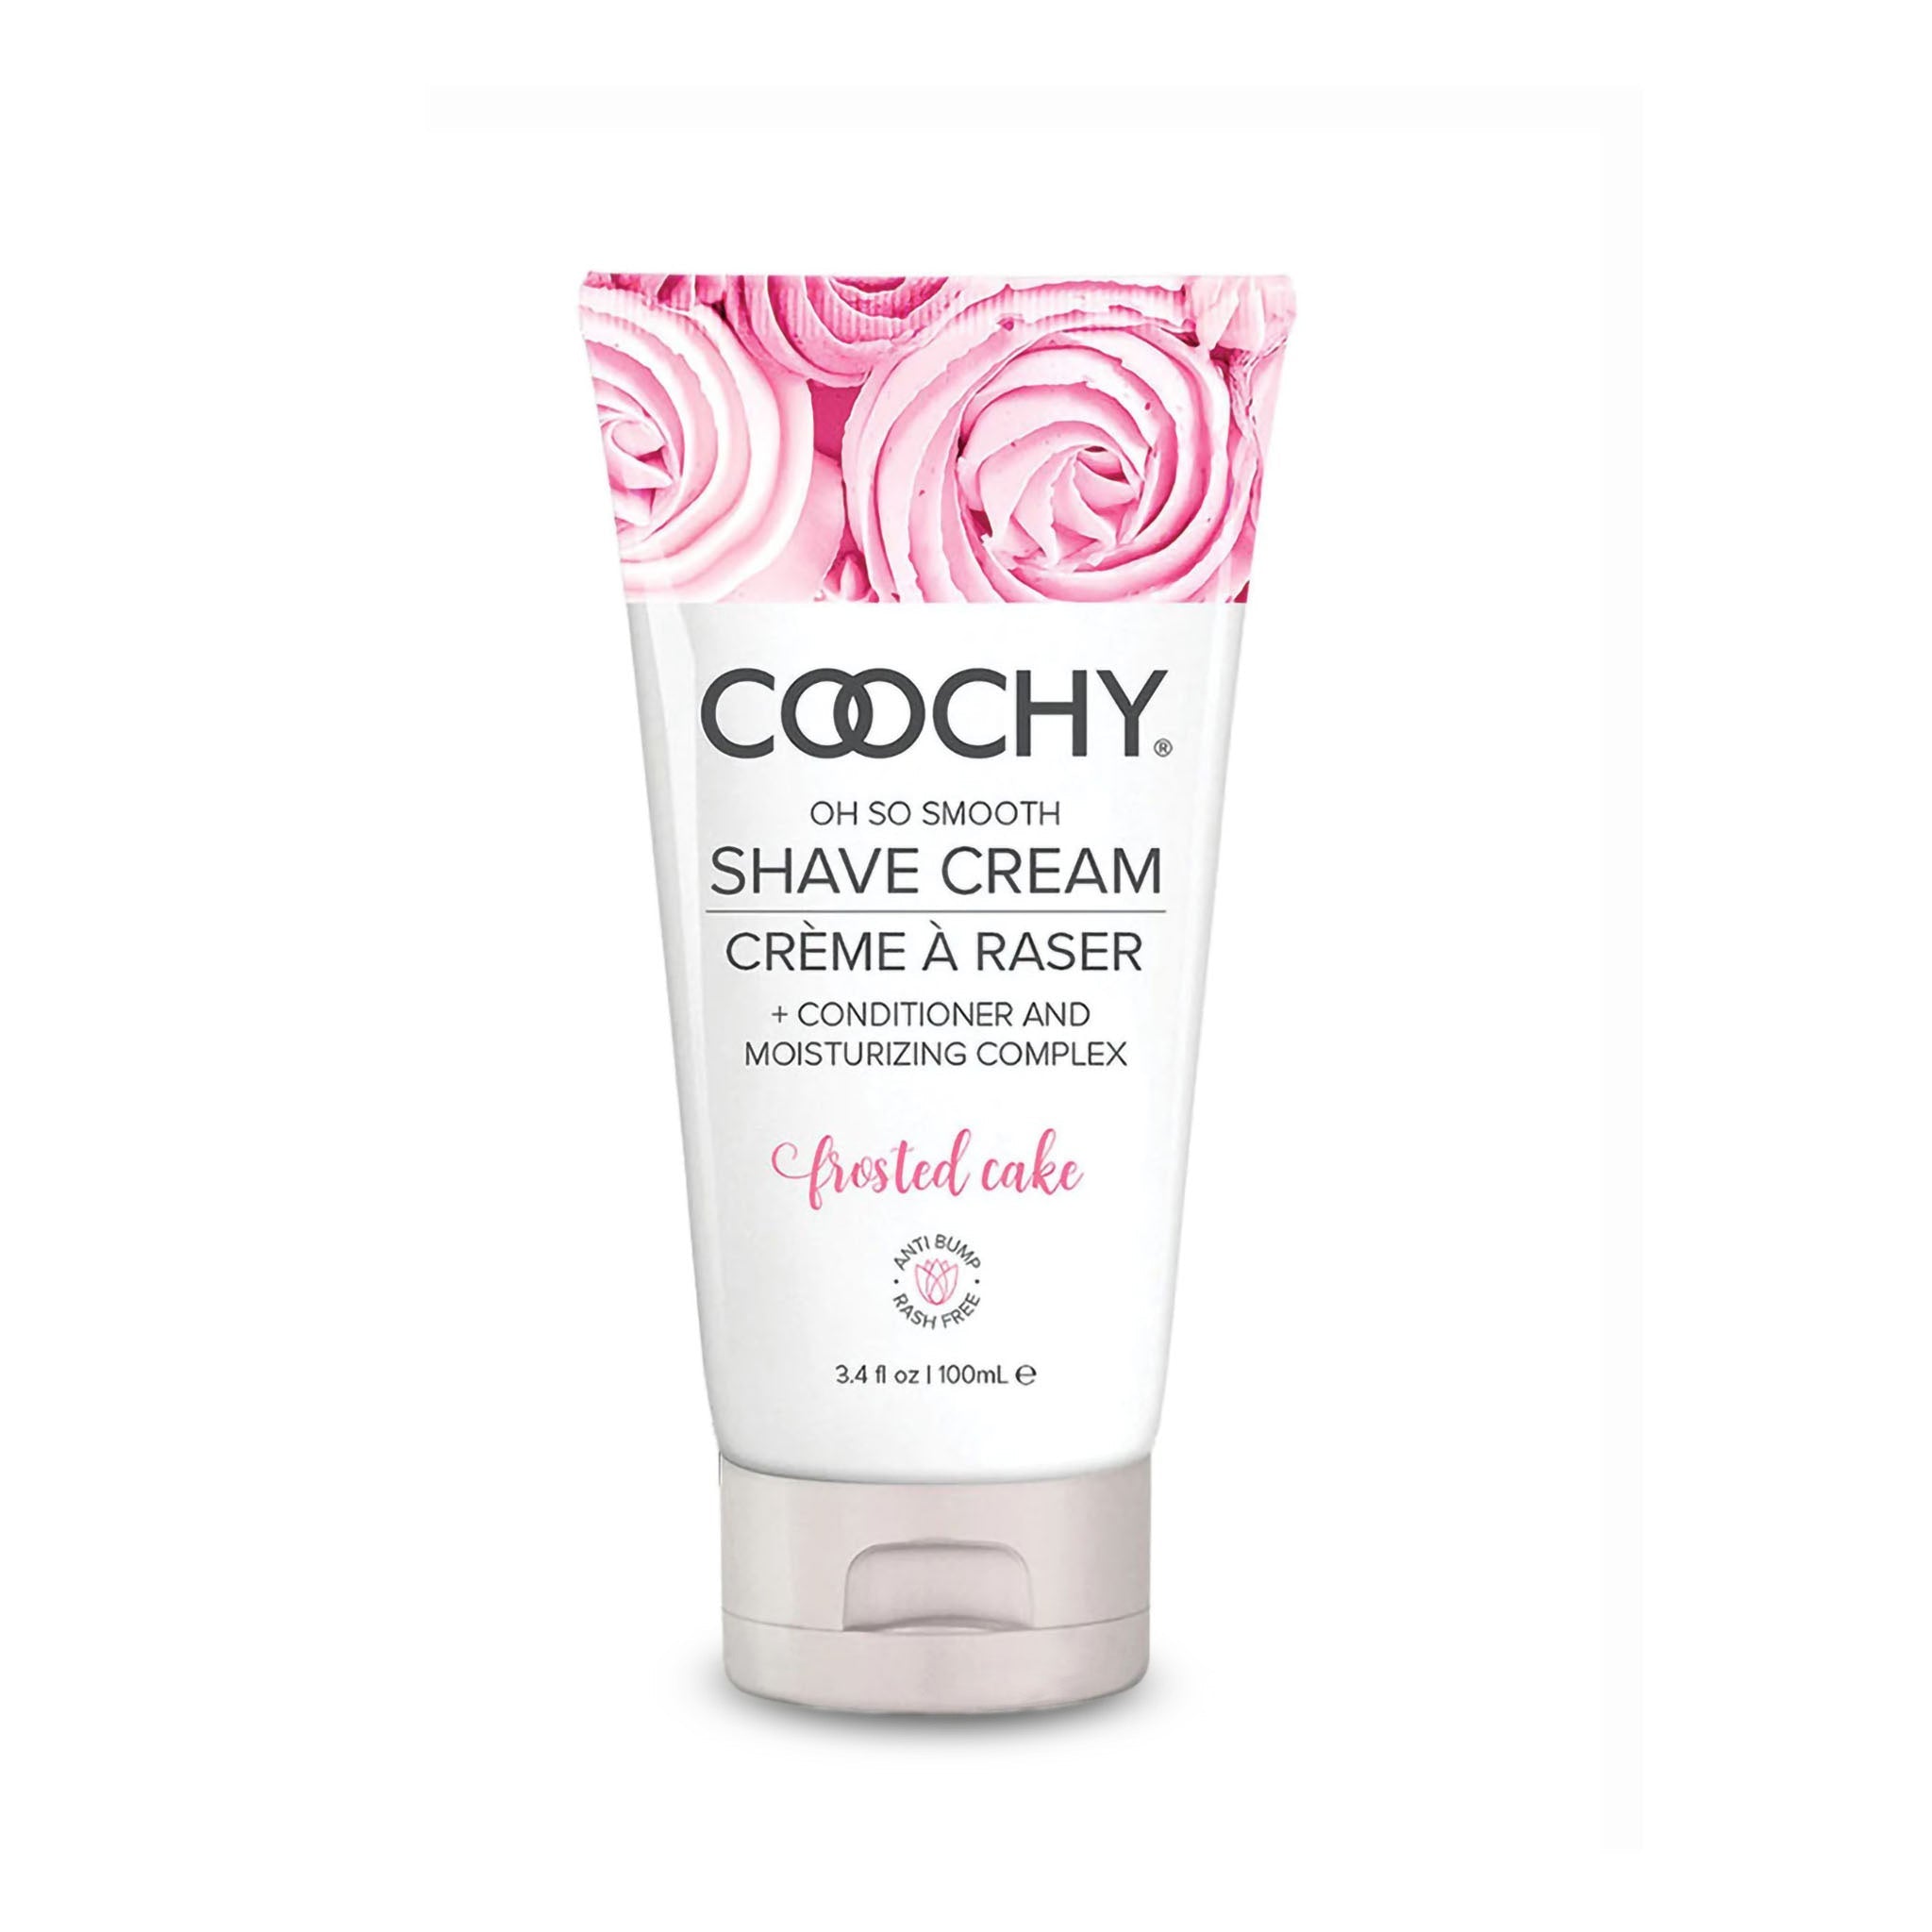 Coochy Oh So Smooth Frosted Cake Shave Shaving Cream 3.4 oz